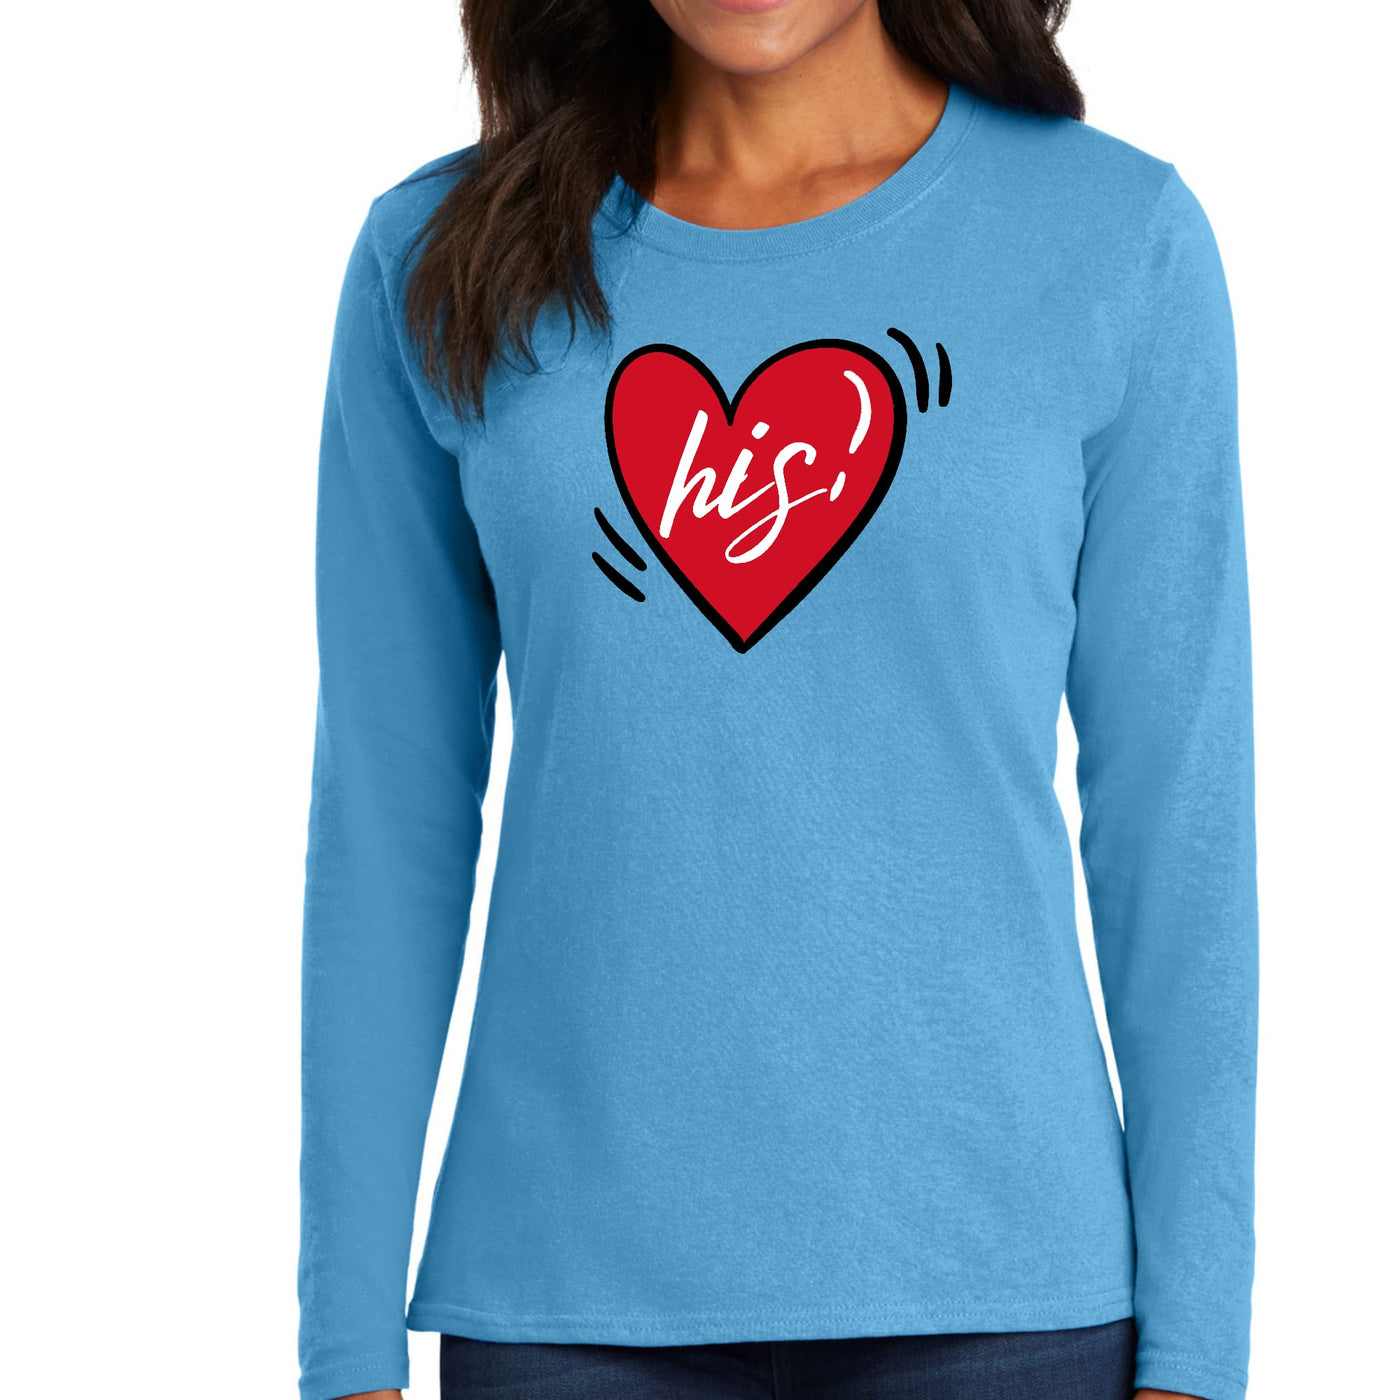 Womens Long Sleeve Graphic T-shirt Say It Soul His Heart Couples - Womens